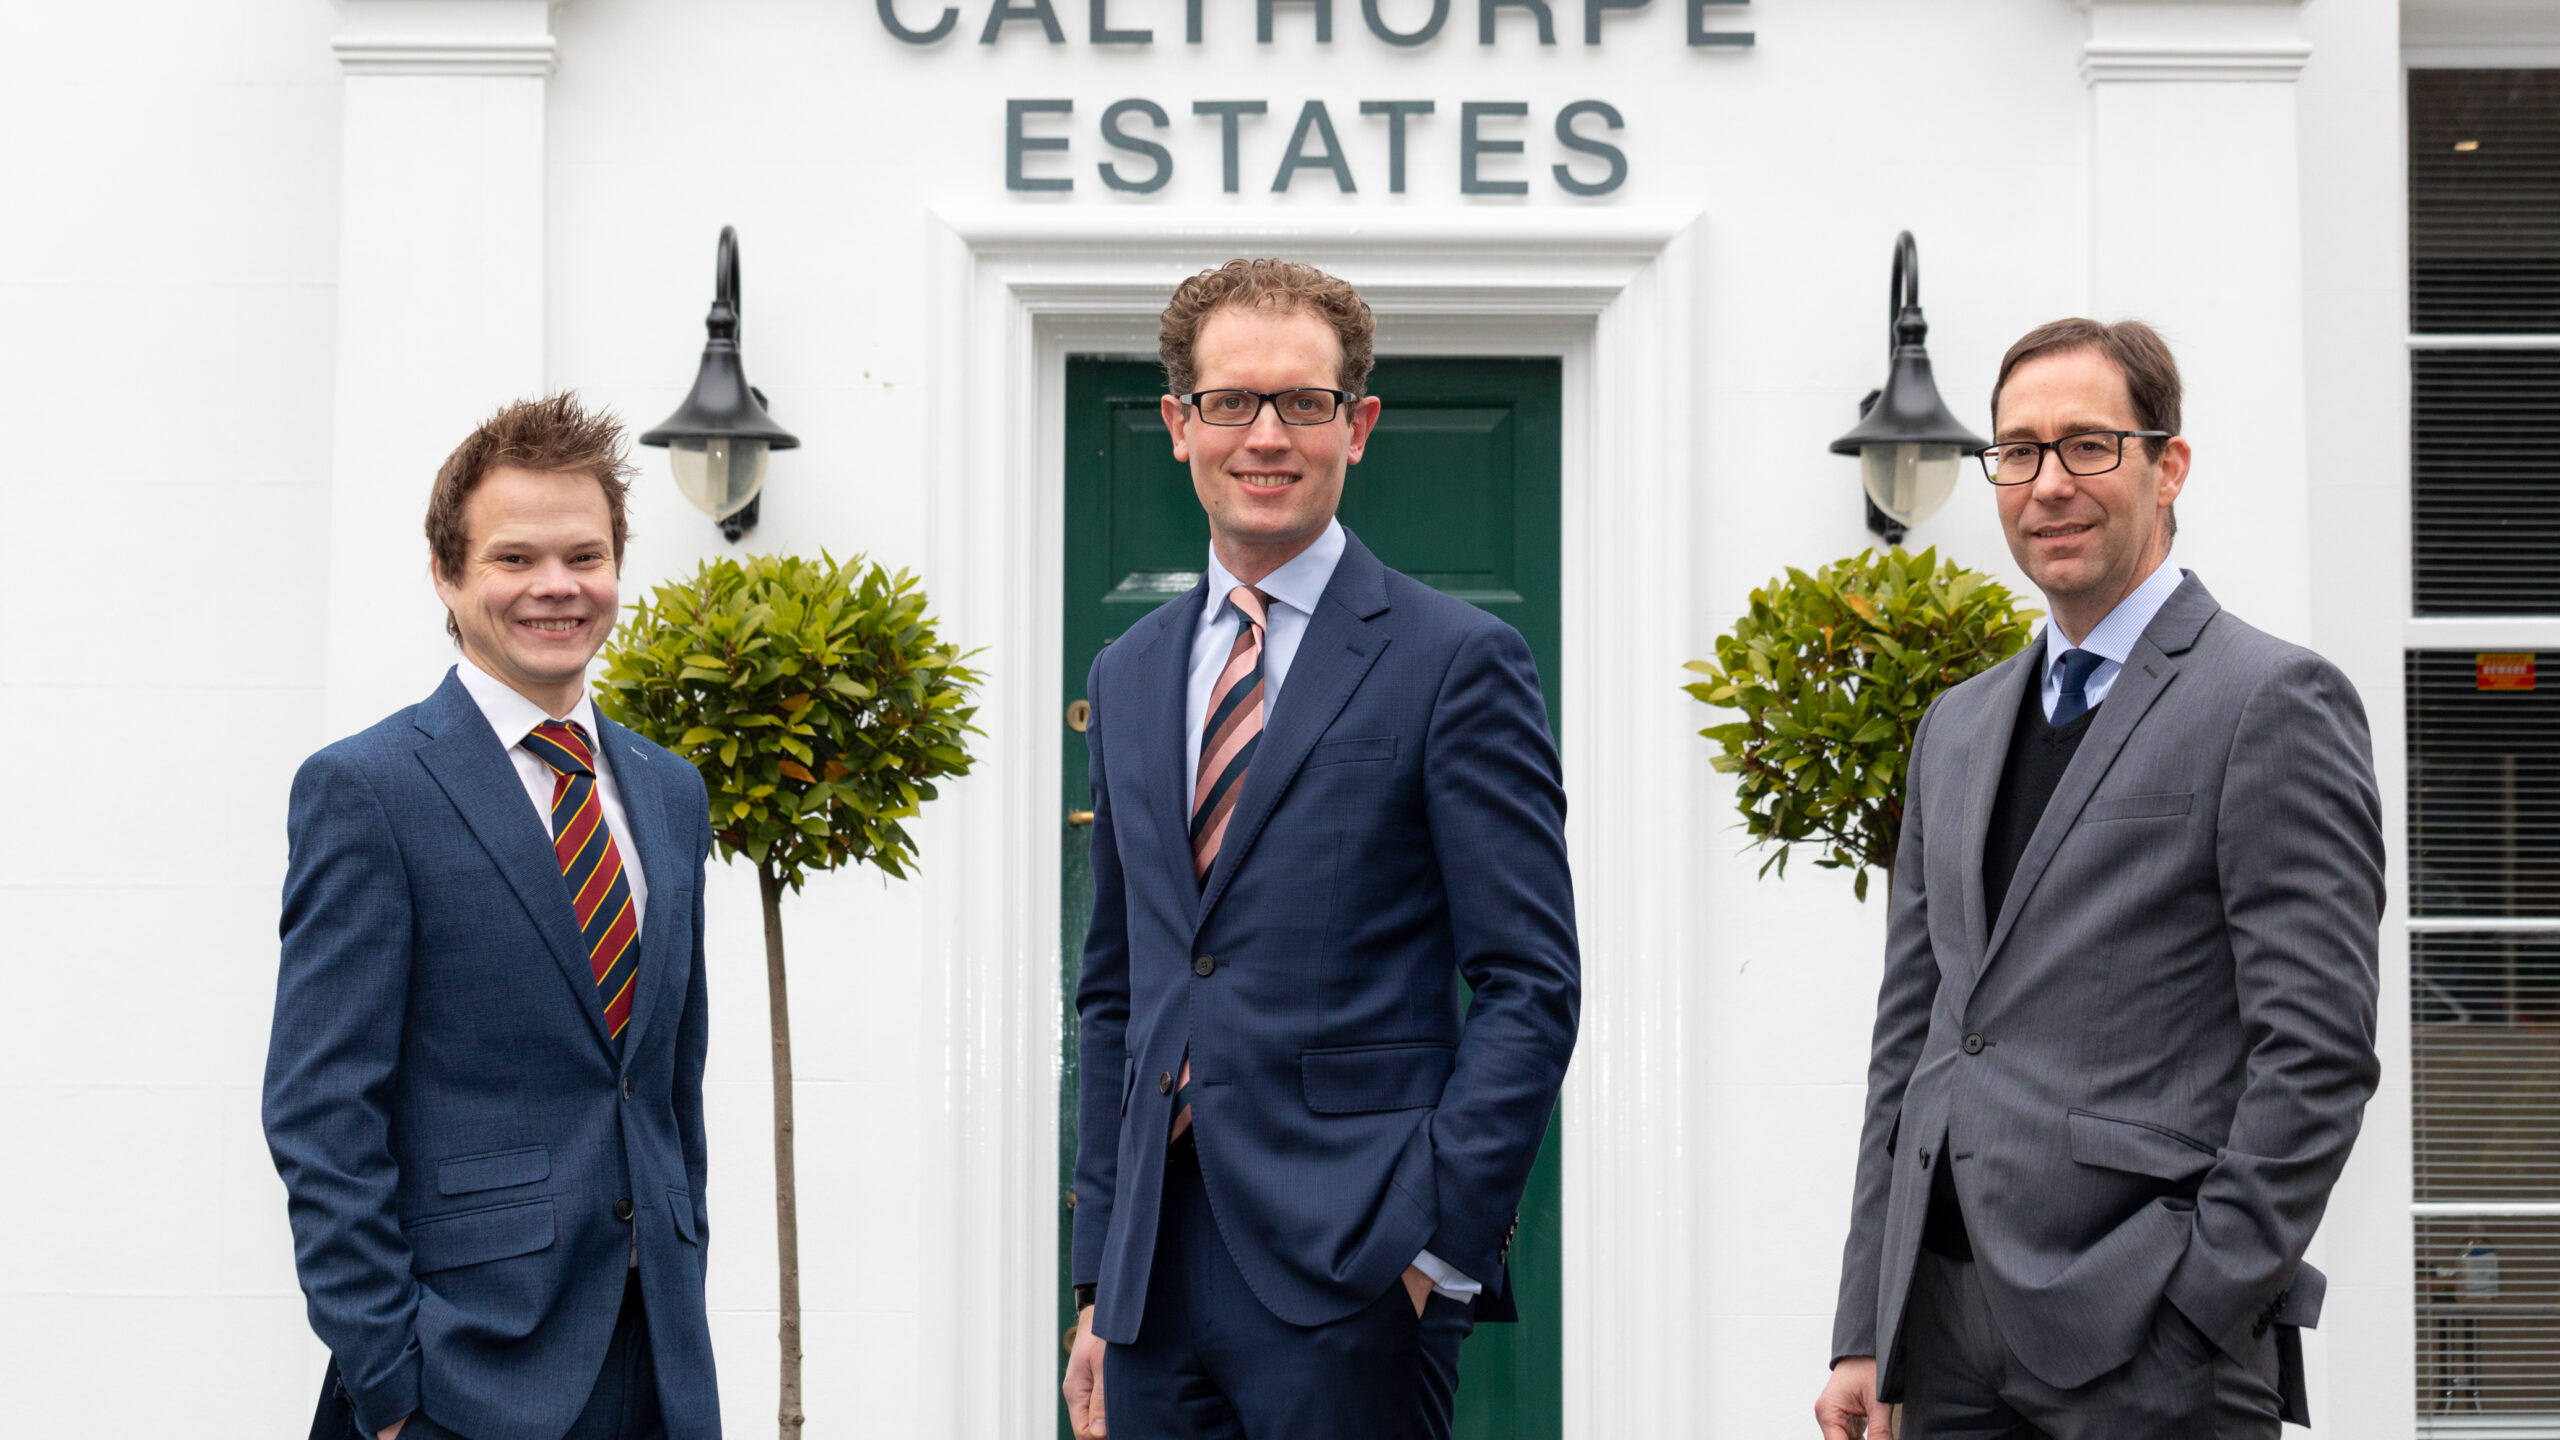 Calthorpe Estates welcomes two new additions to its property team